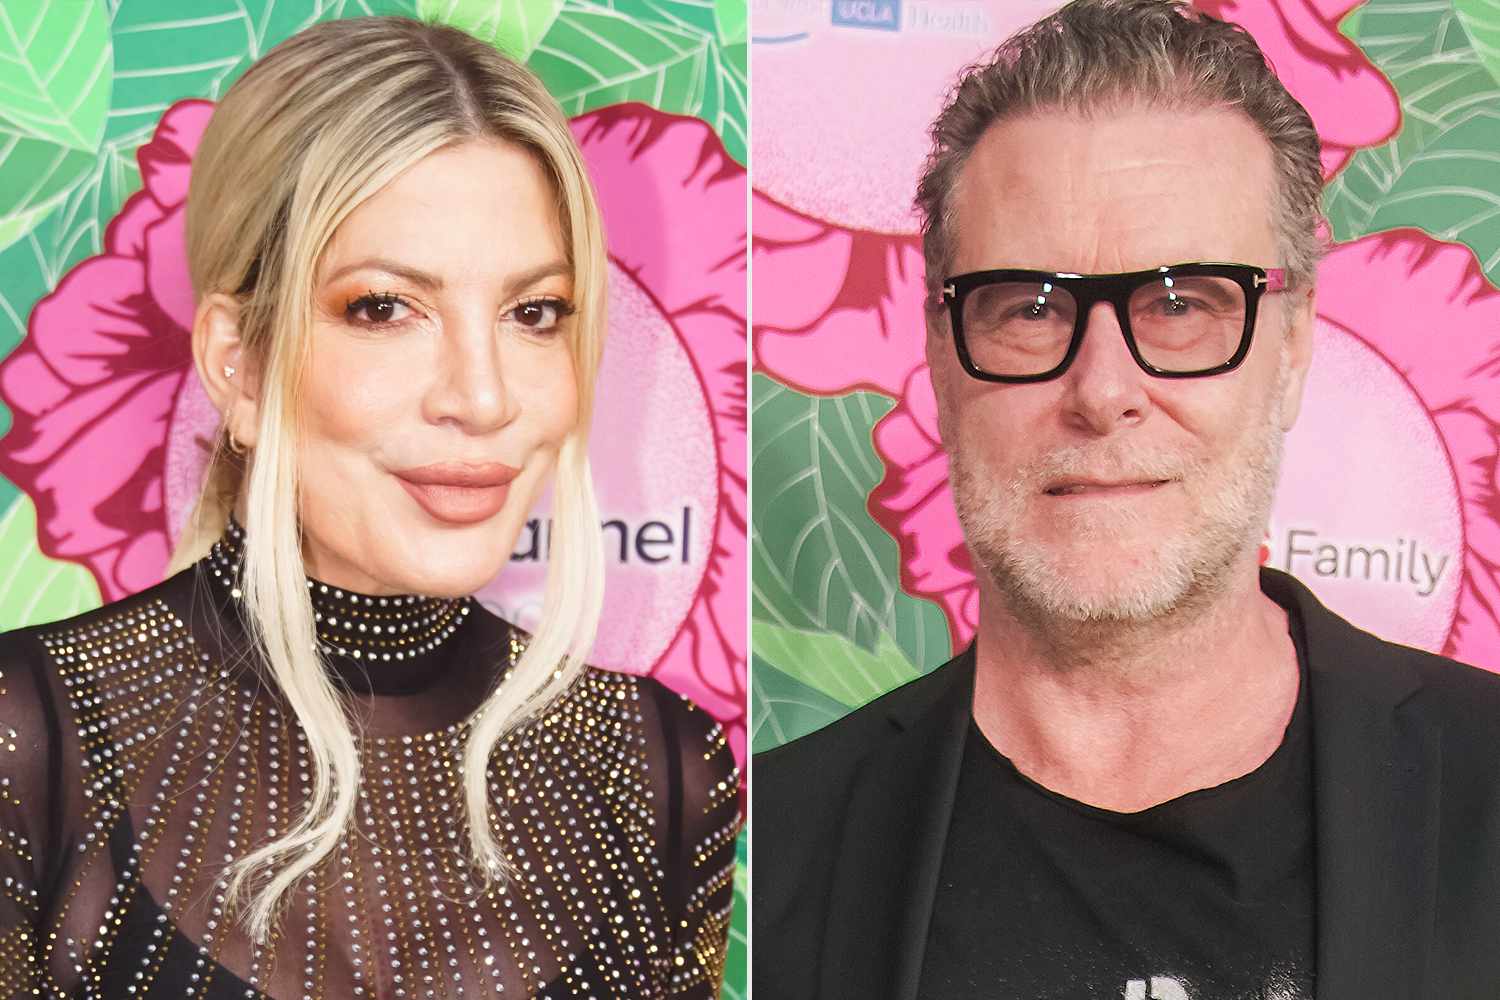 Tori Spelling Marks Her Wedding Anniversary amid Dean McDermott Divorce: 'Just Another Day from Now On'